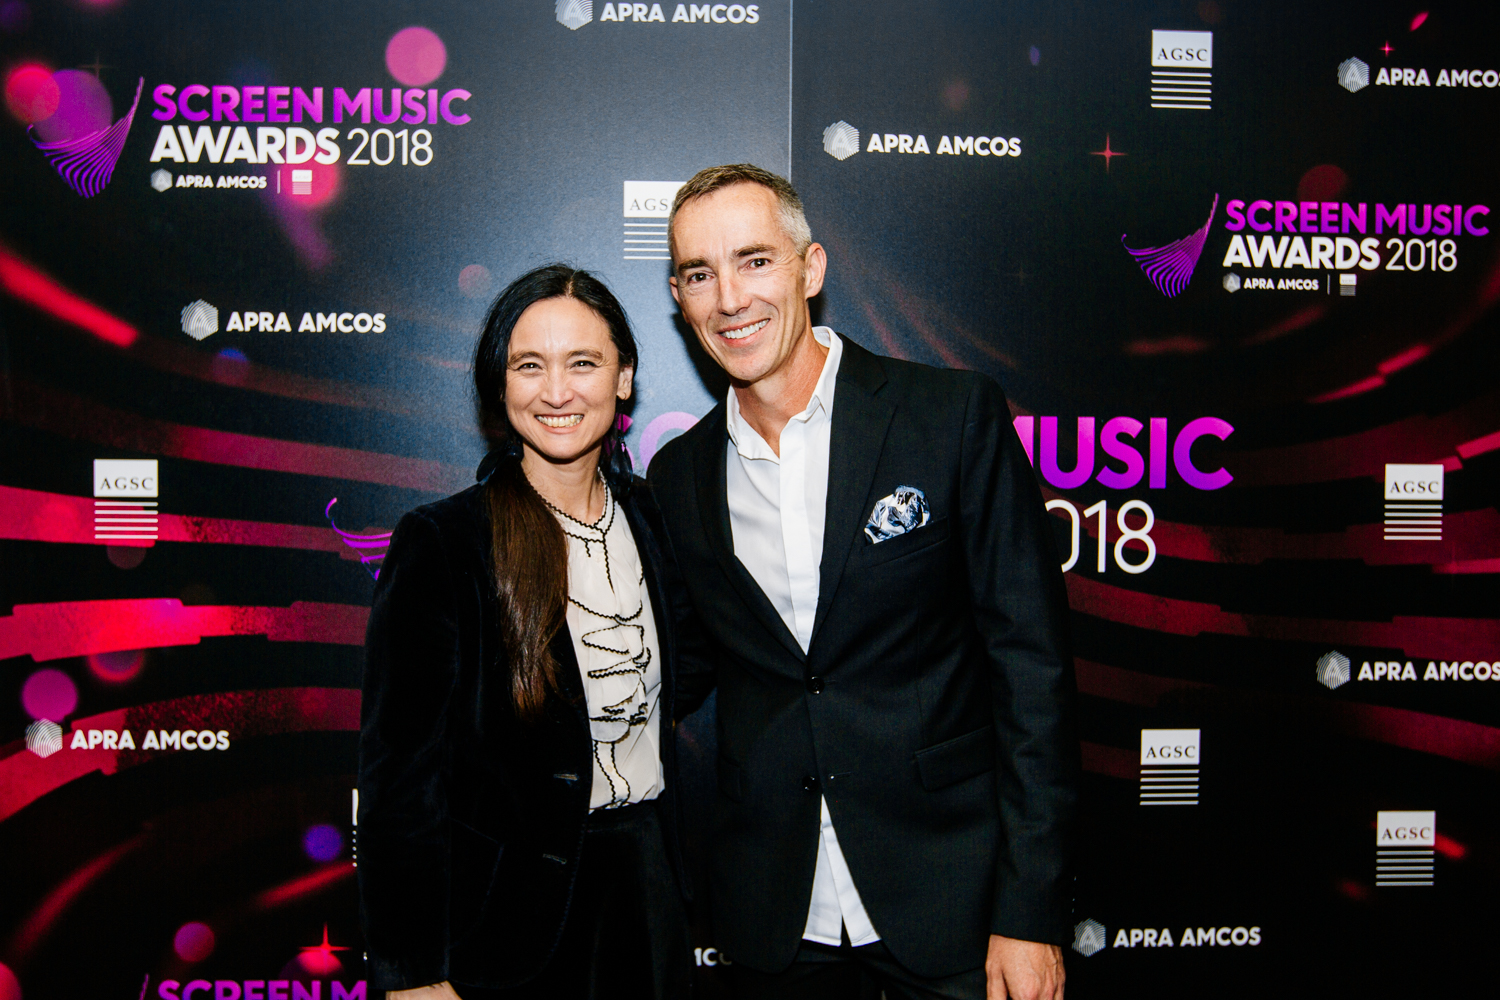 New wave of composers win big at Screen Music Awards